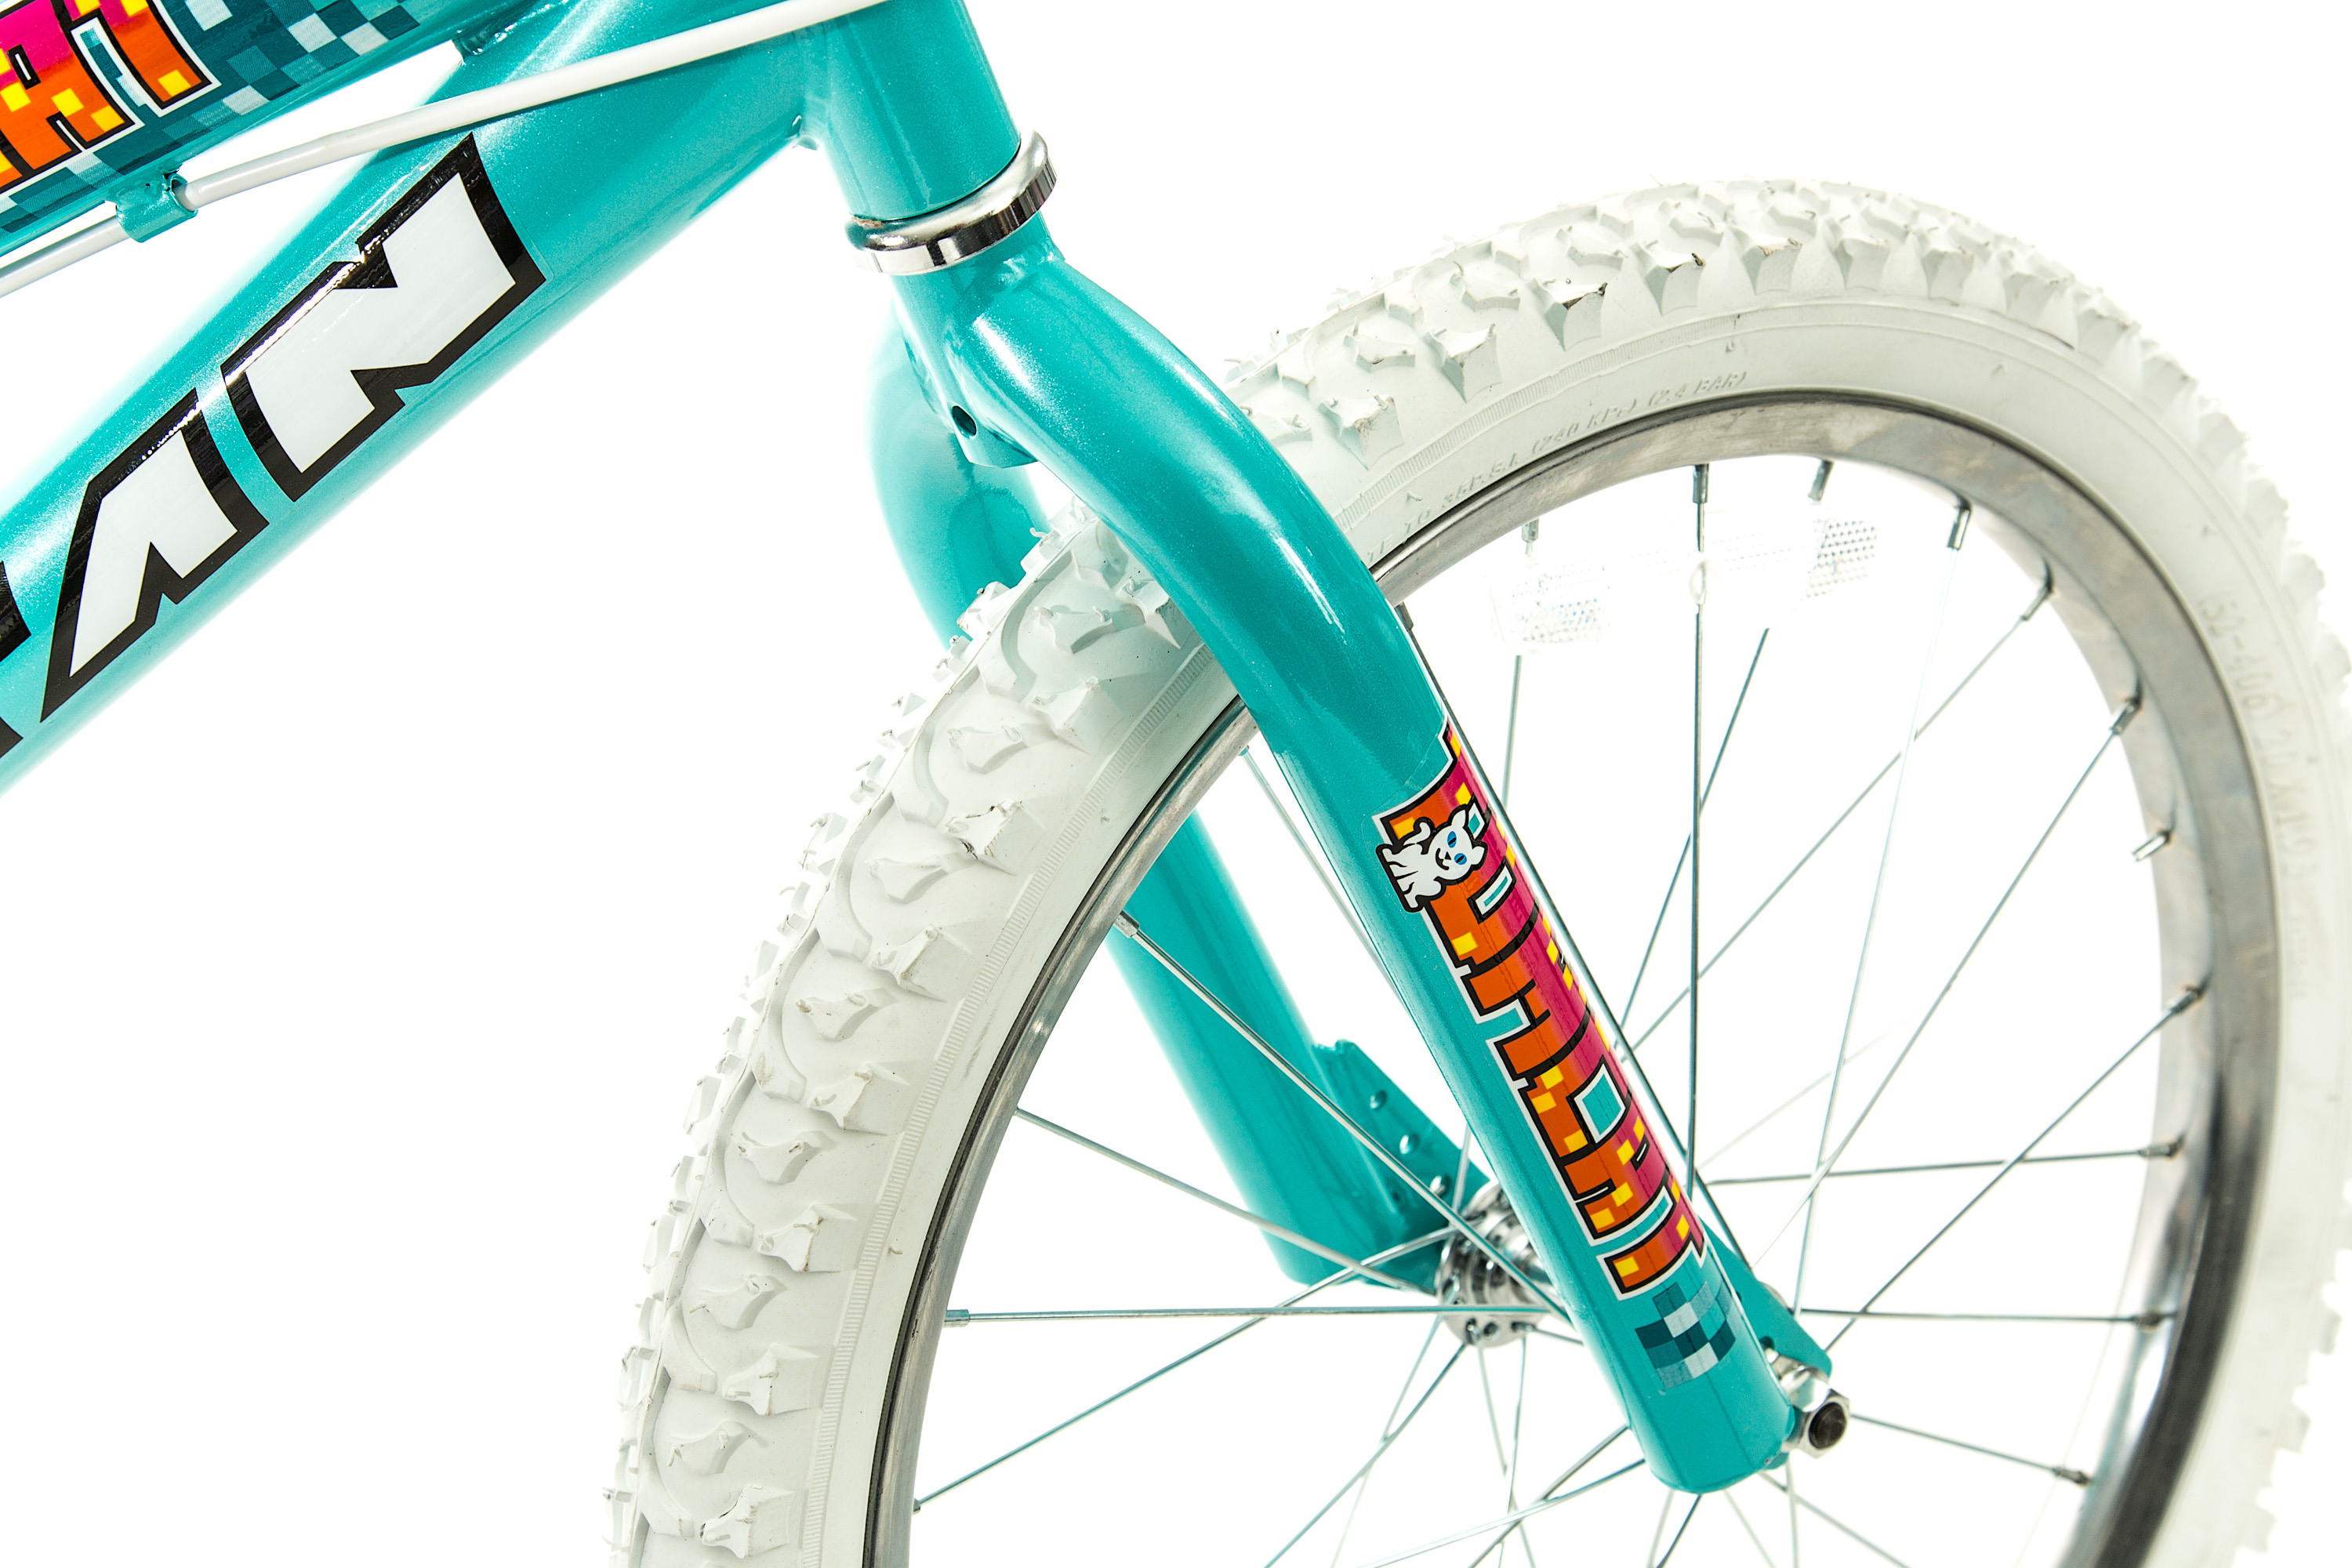 Titan 20 In. Tomcat Girls BMX Bike with Pads, Teal Blue - image 3 of 5